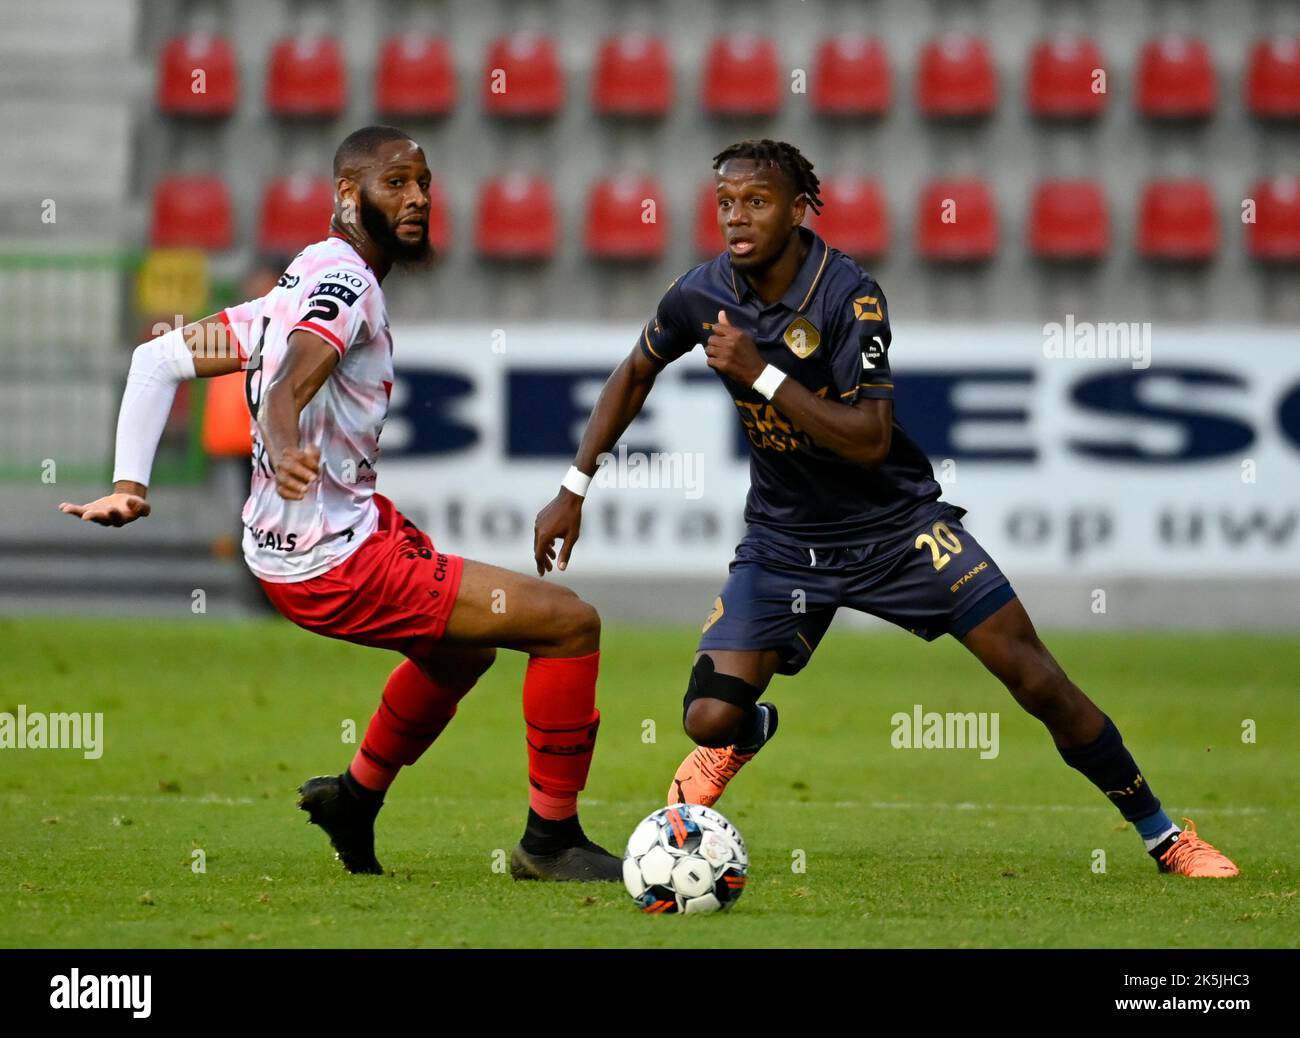 Essevee's Abdulaye Sissako and OHL's Hamza Mendyl fight for the ball during a soccer match between SV Zulte Waregem and OH Leuven, Saturday 08 October 2022 in Waregem, on day 11 of the 2022-2023 'Jupiler Pro League' first division of the Belgian championship. BELGA PHOTO JOHN THYS Stock Photo